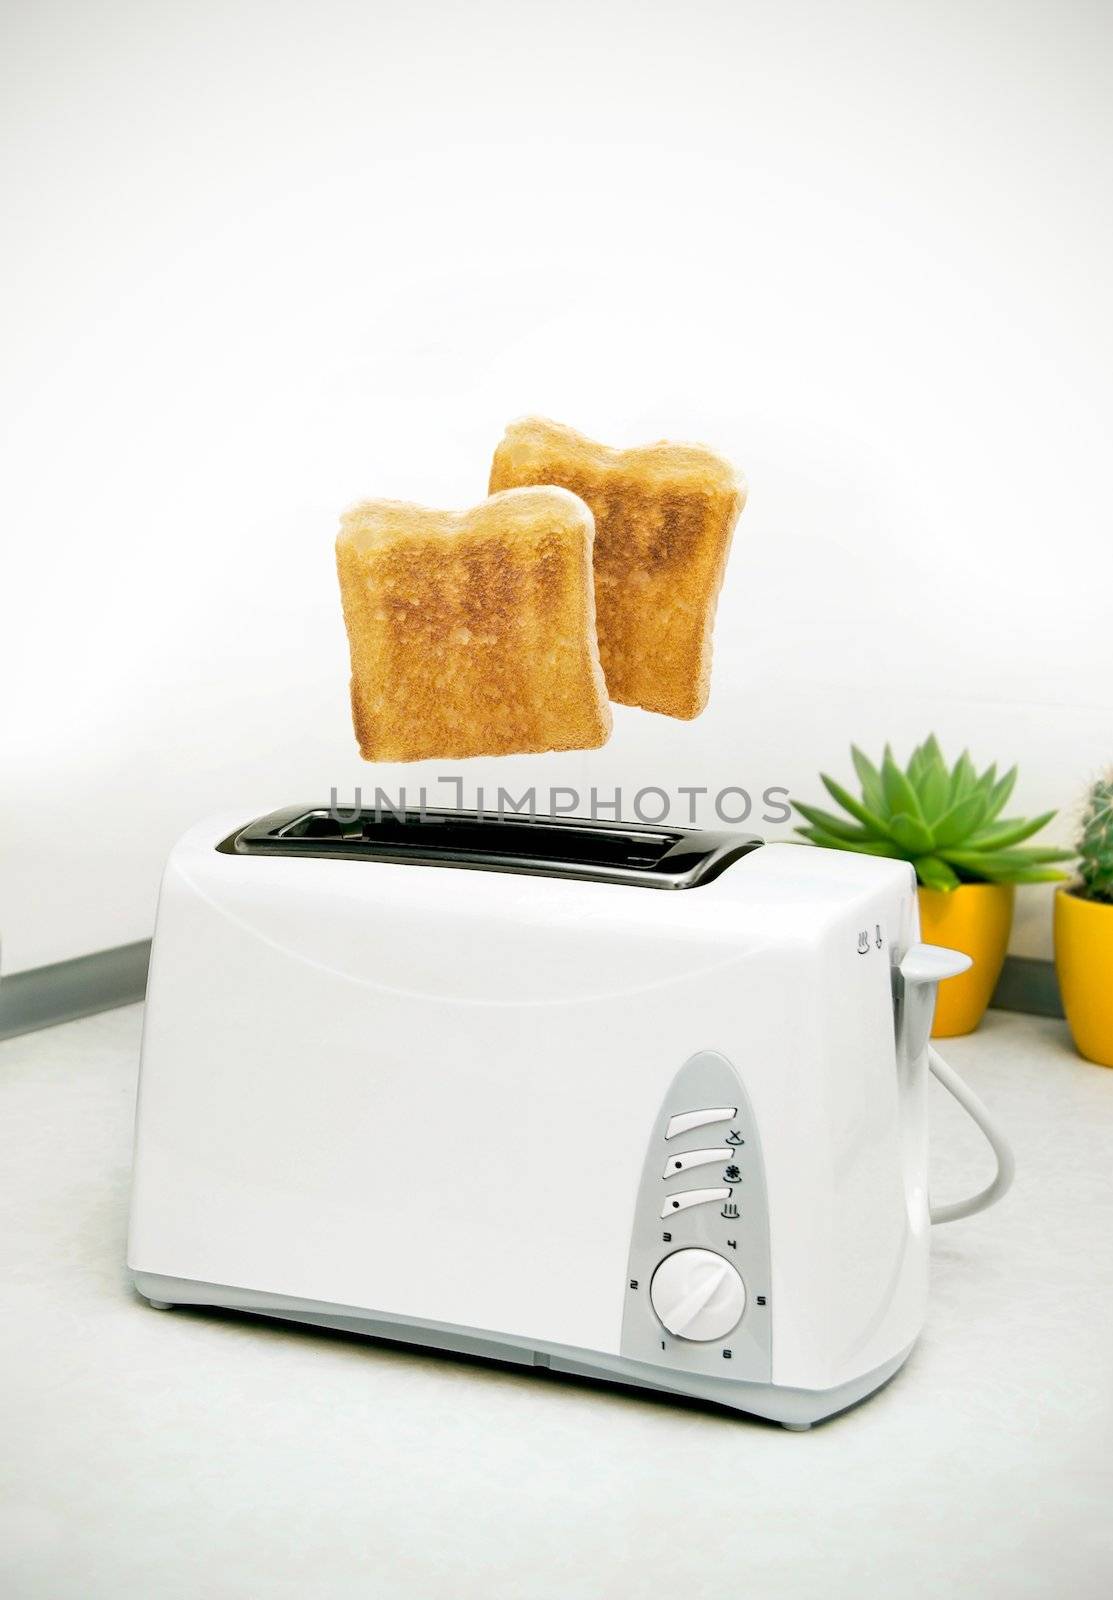 Jumping toasts. Prepare breakfast in kitchen by simpson33